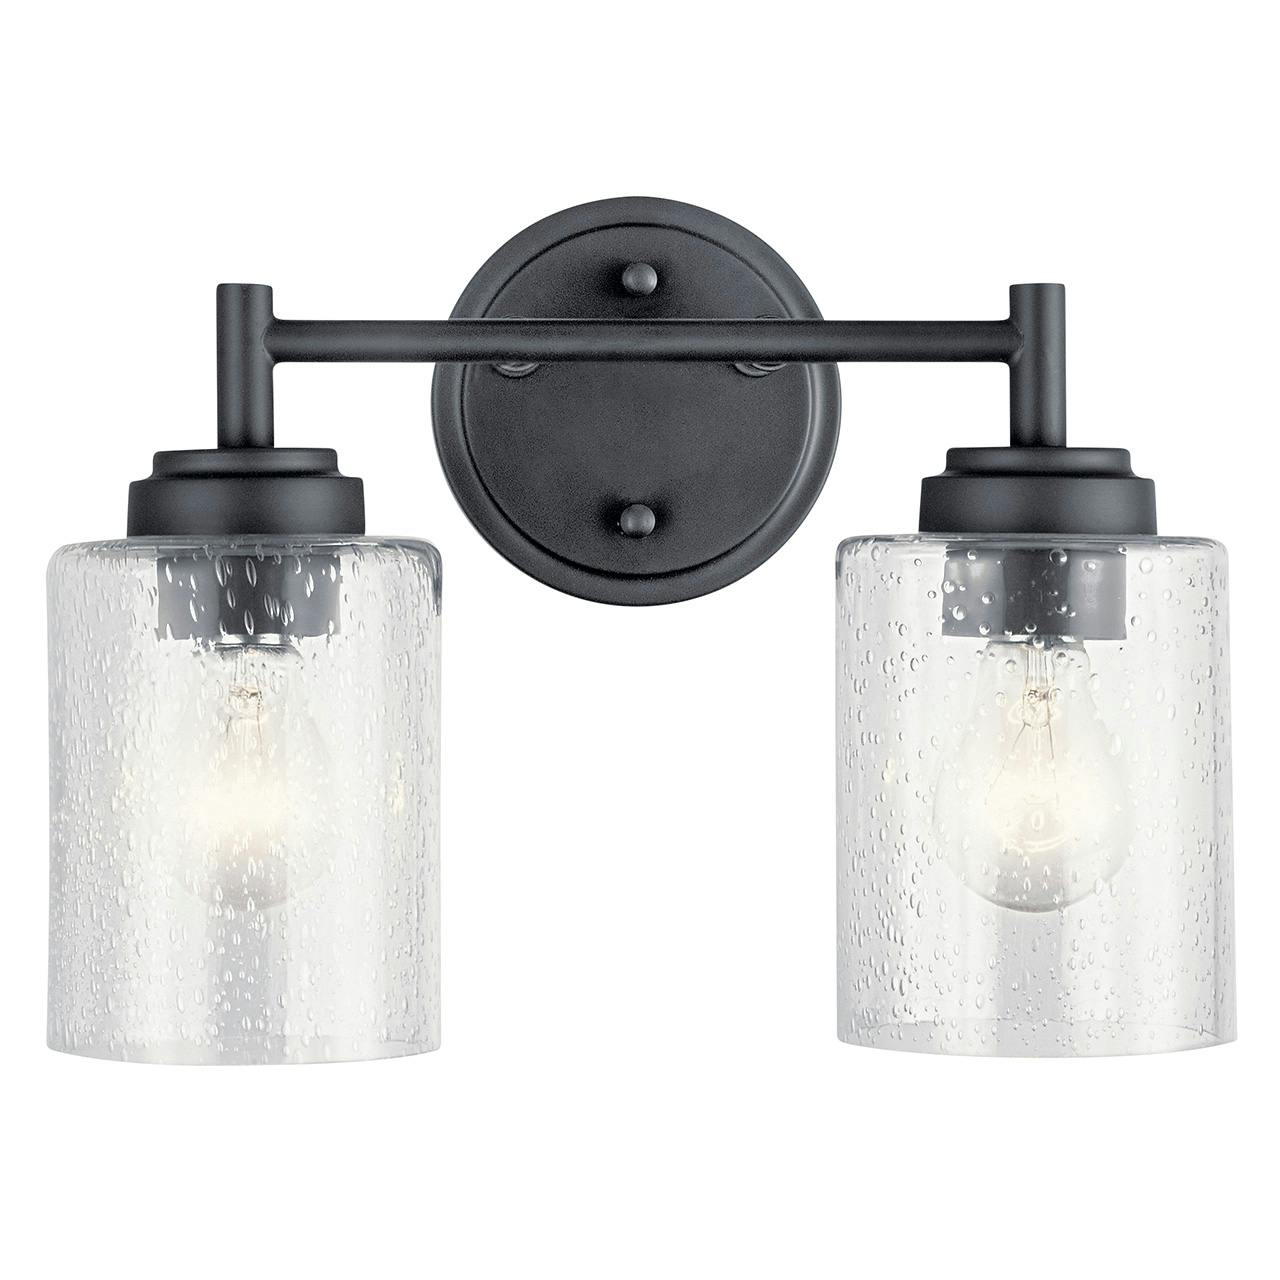 The Winslow 2 Light Vanity Light Black facing down on a white background